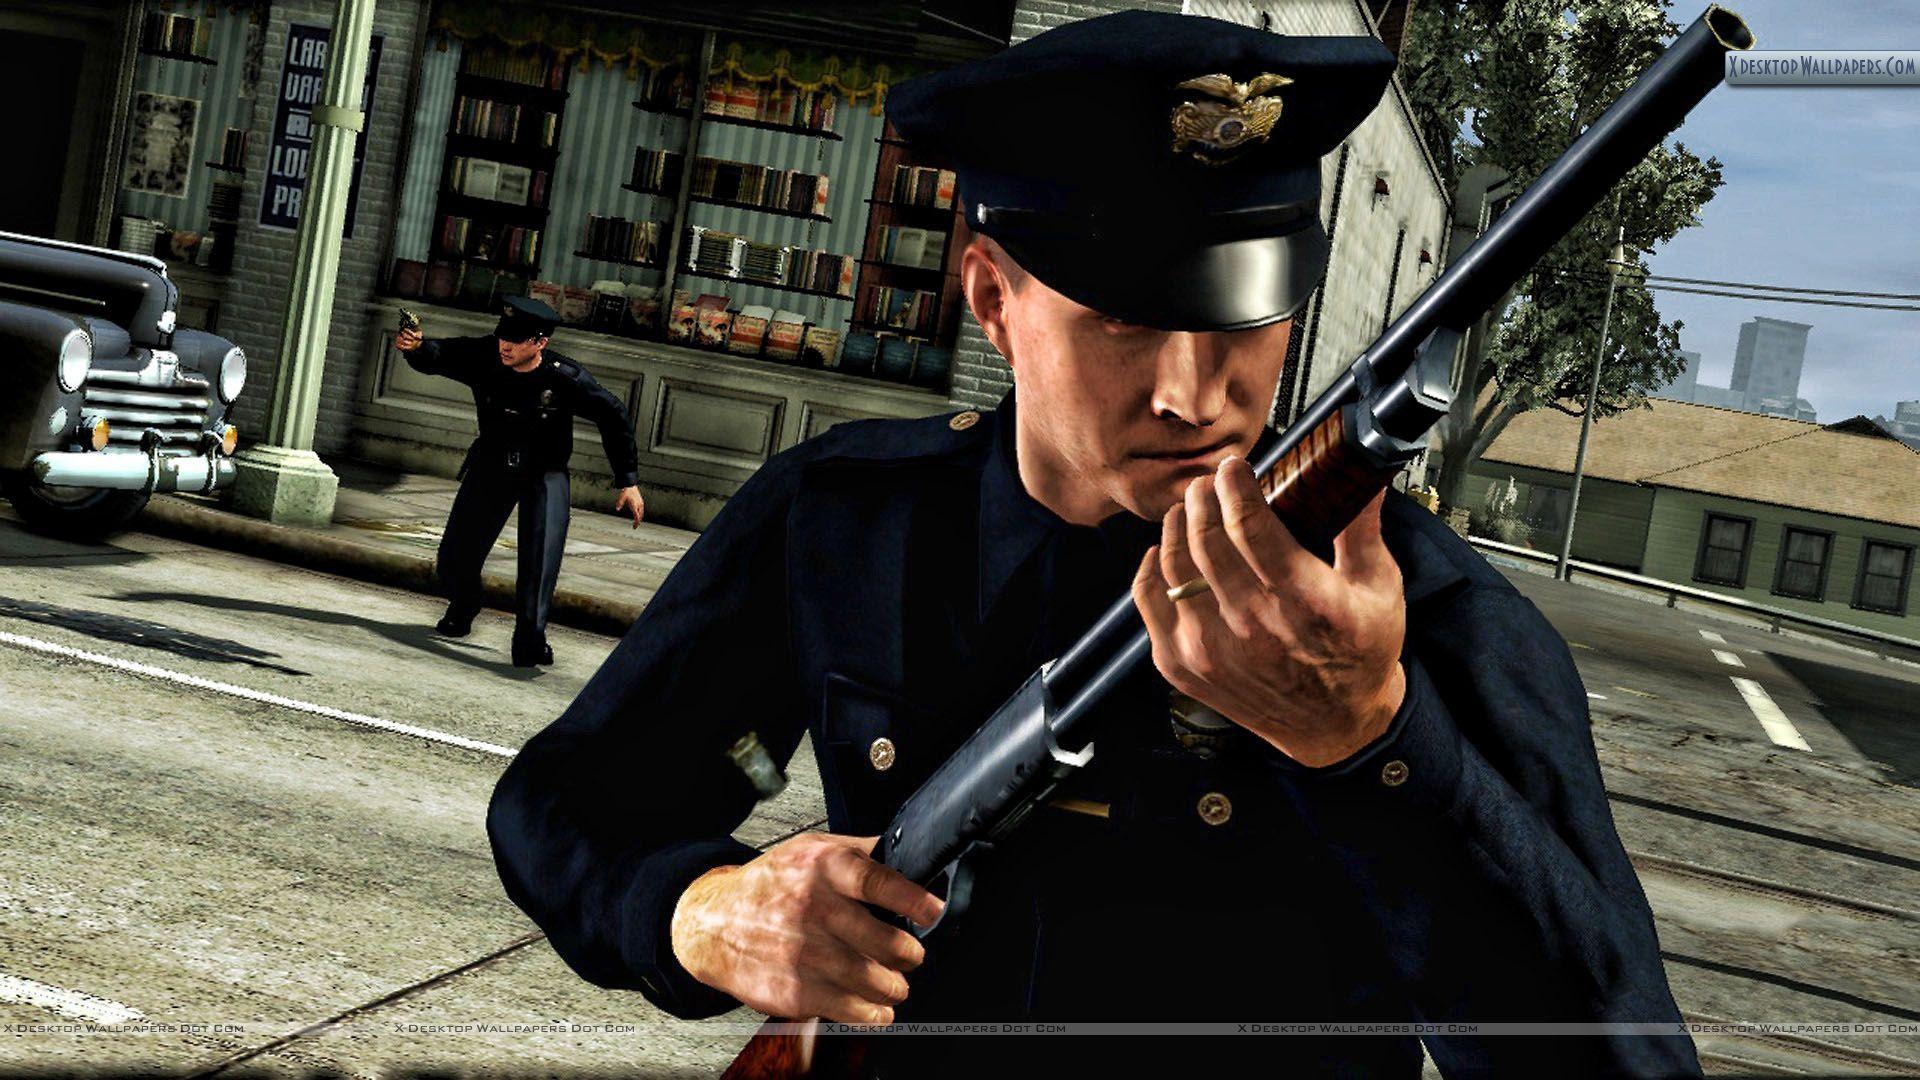 Policeman Wallpaper, Photo & Image in HD